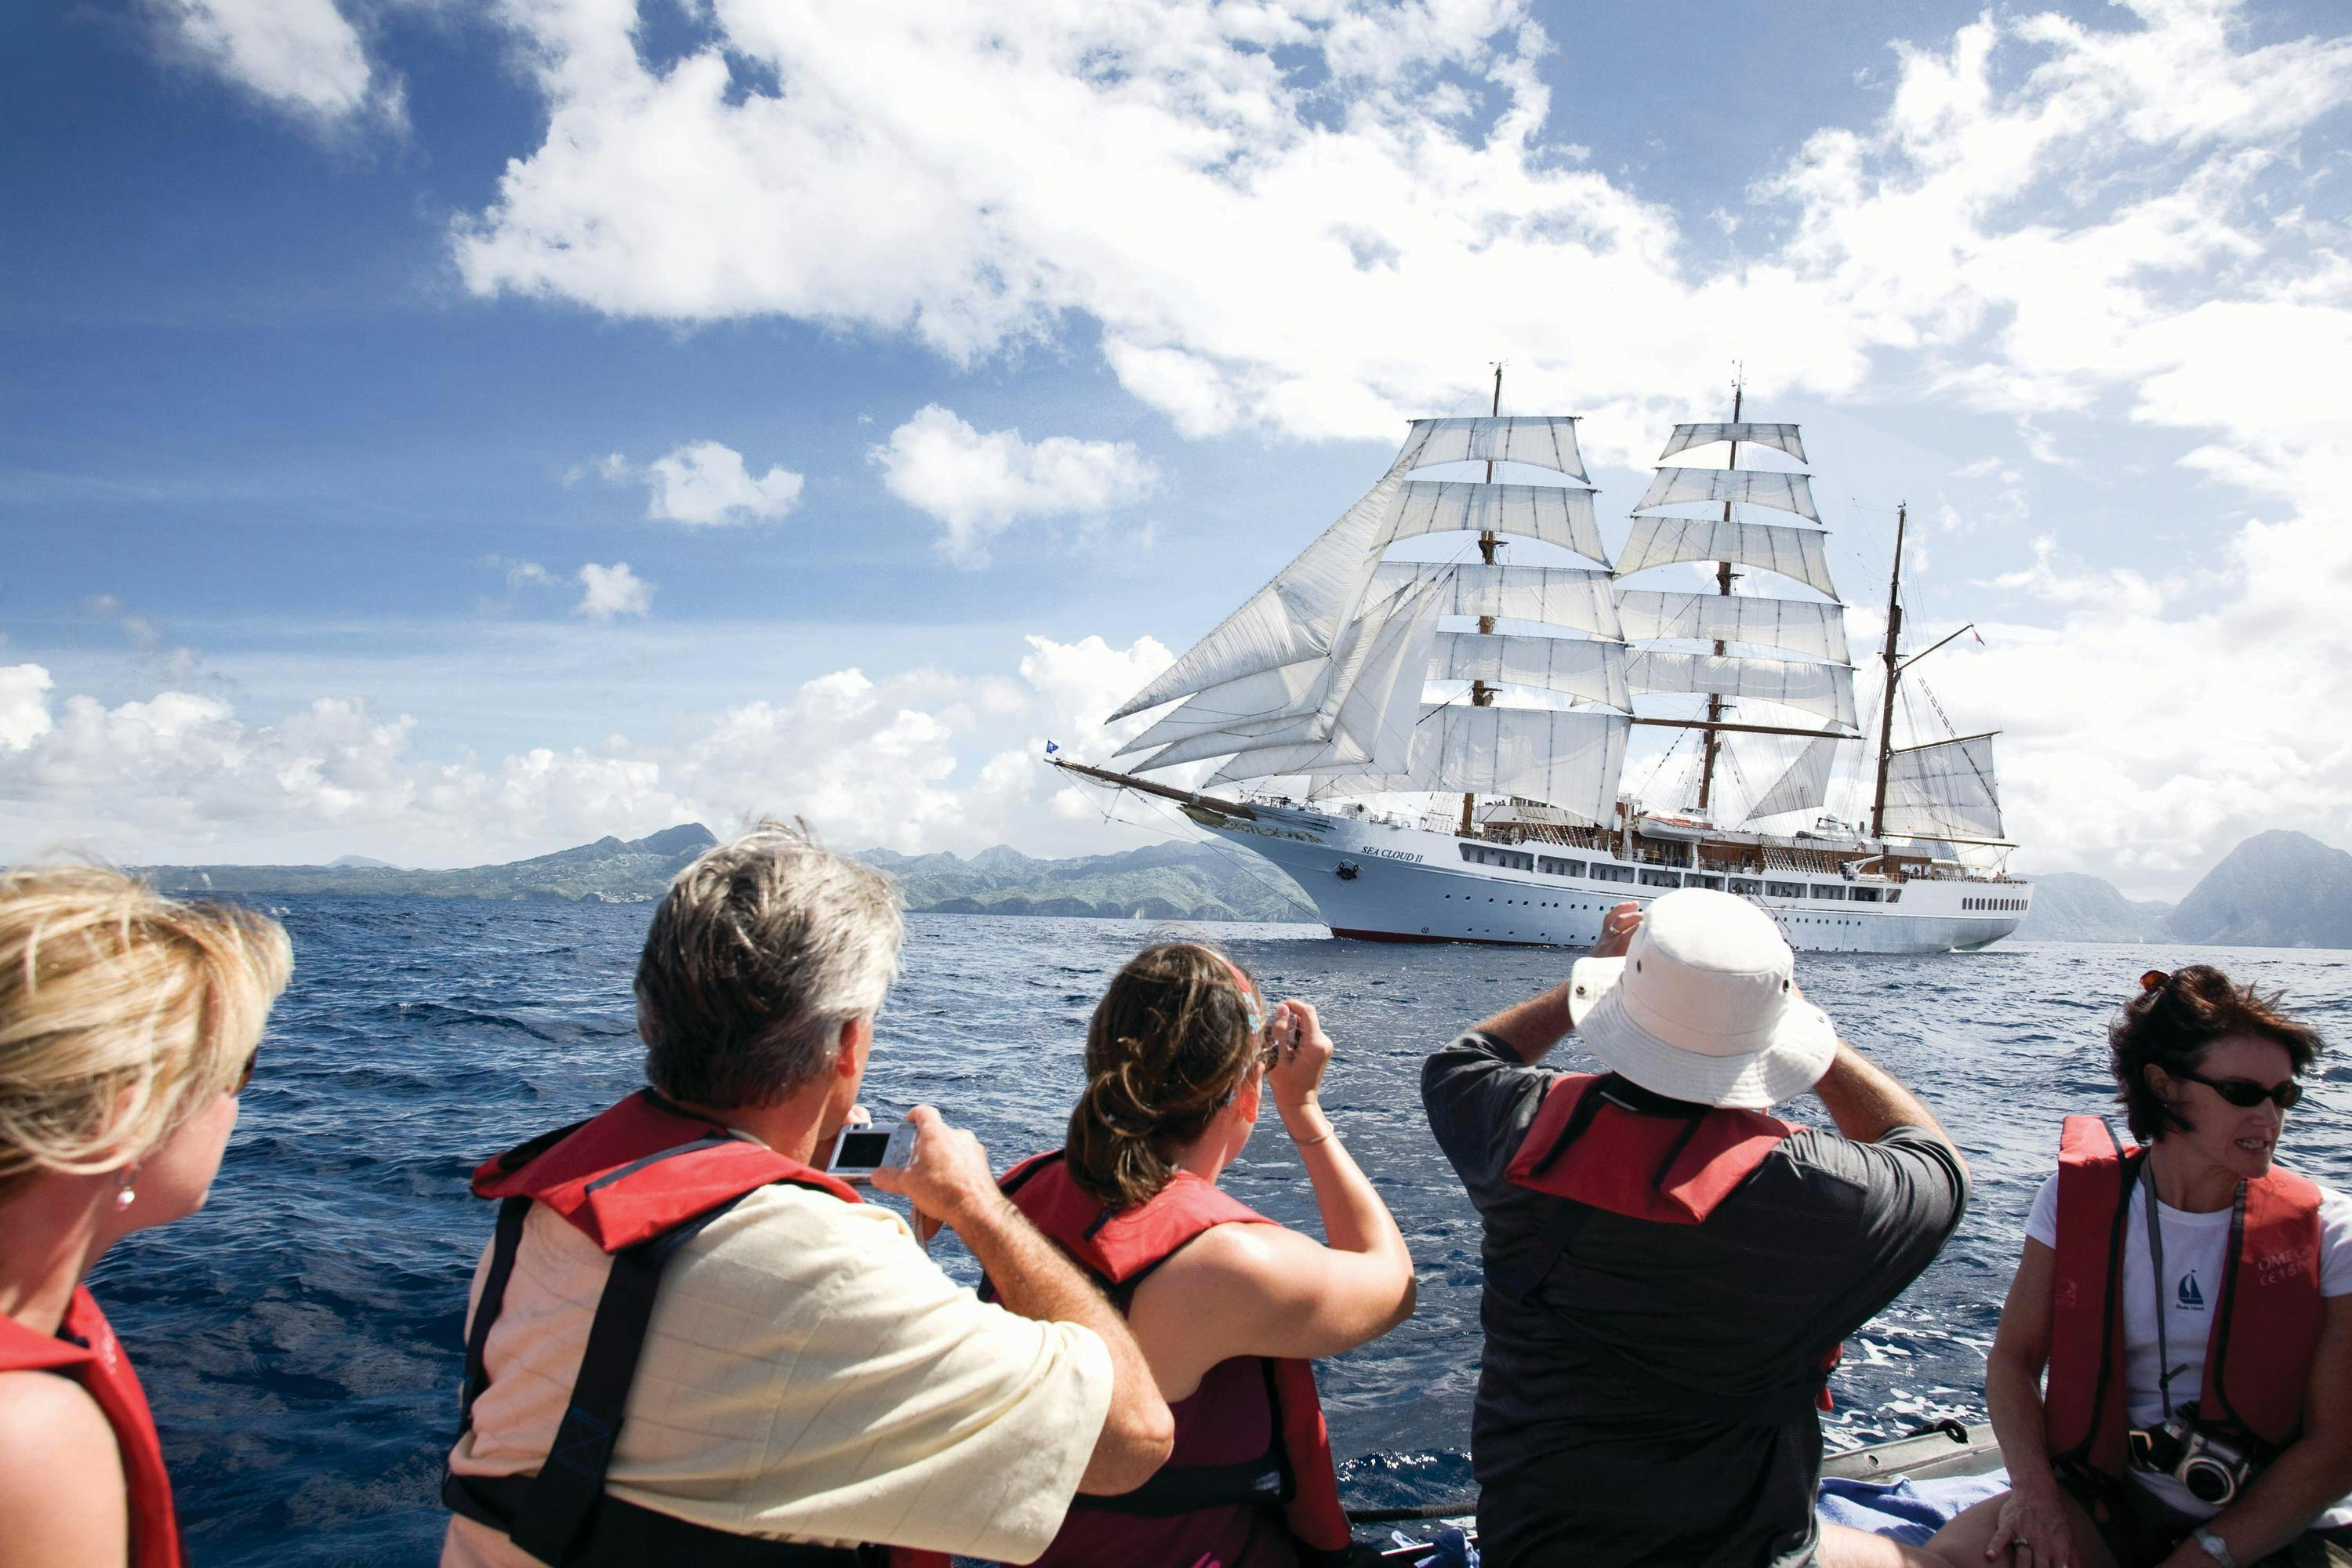 Guests enjoy the view of the ship Sea Cloud II in full sail from a watercraft expedition.